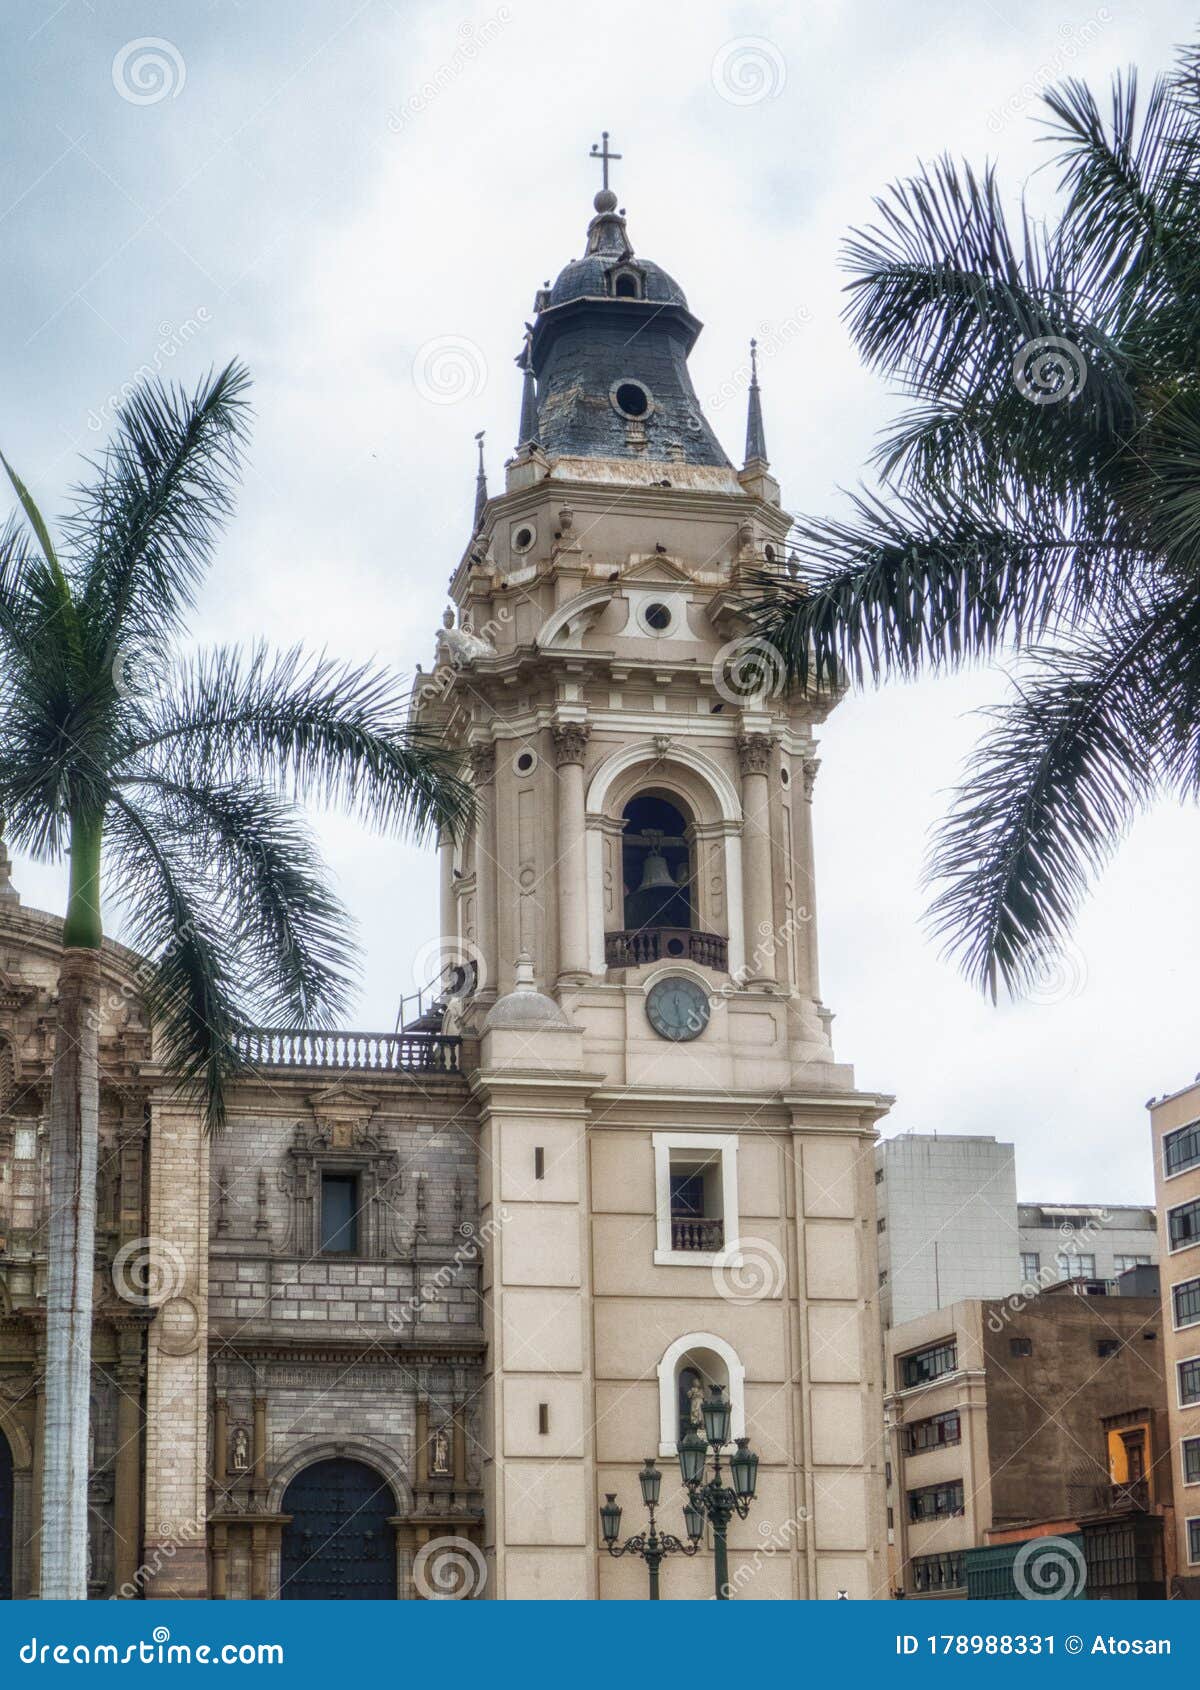 bell tower for the cathedral in the plaza de armas